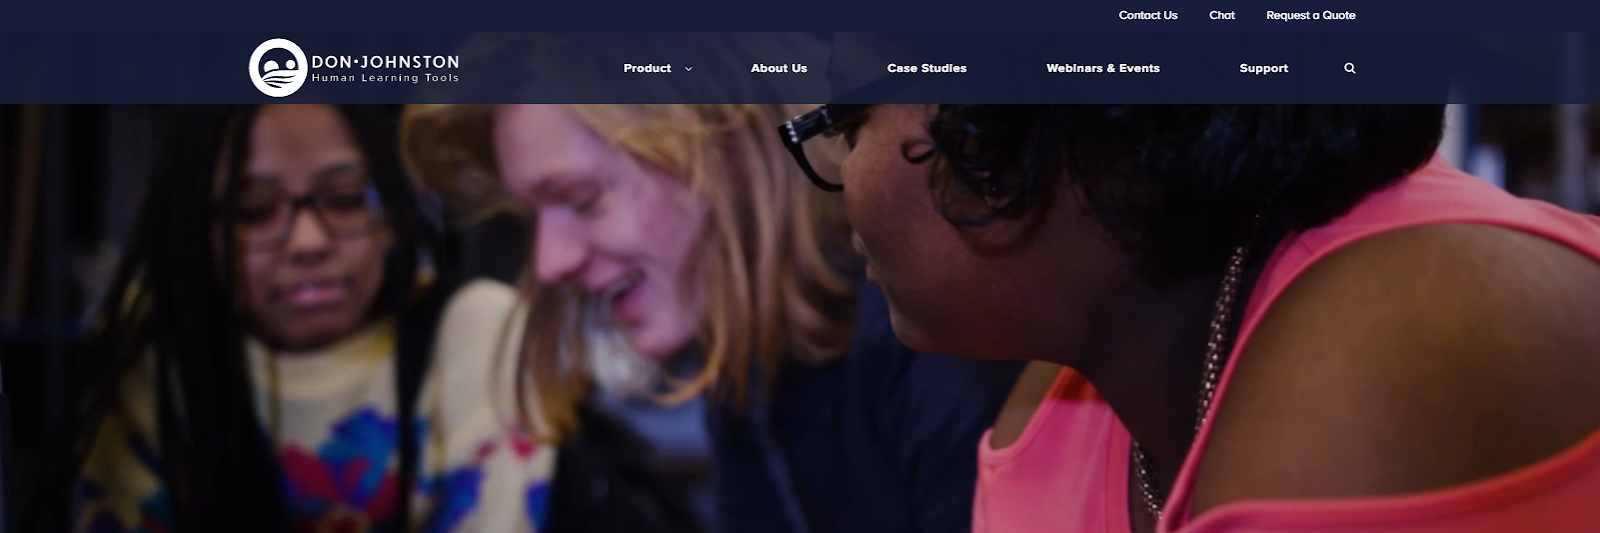 New Don Johnston website with students smiling